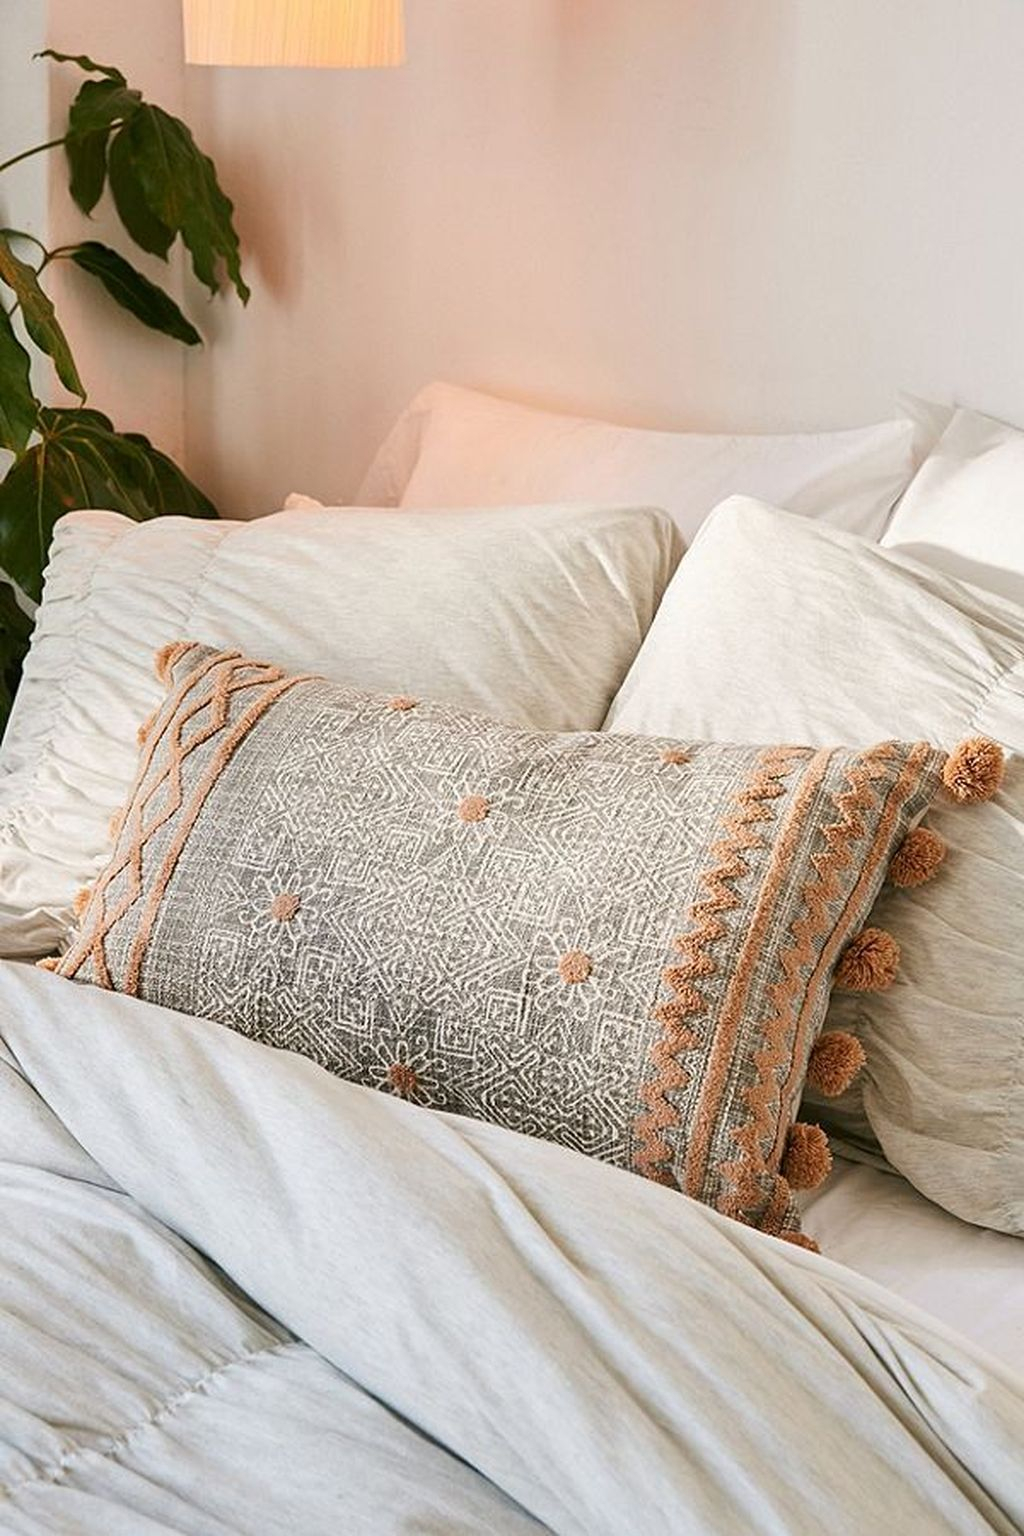 Charming Pillow Decorative Ideas To Apply Asap 04